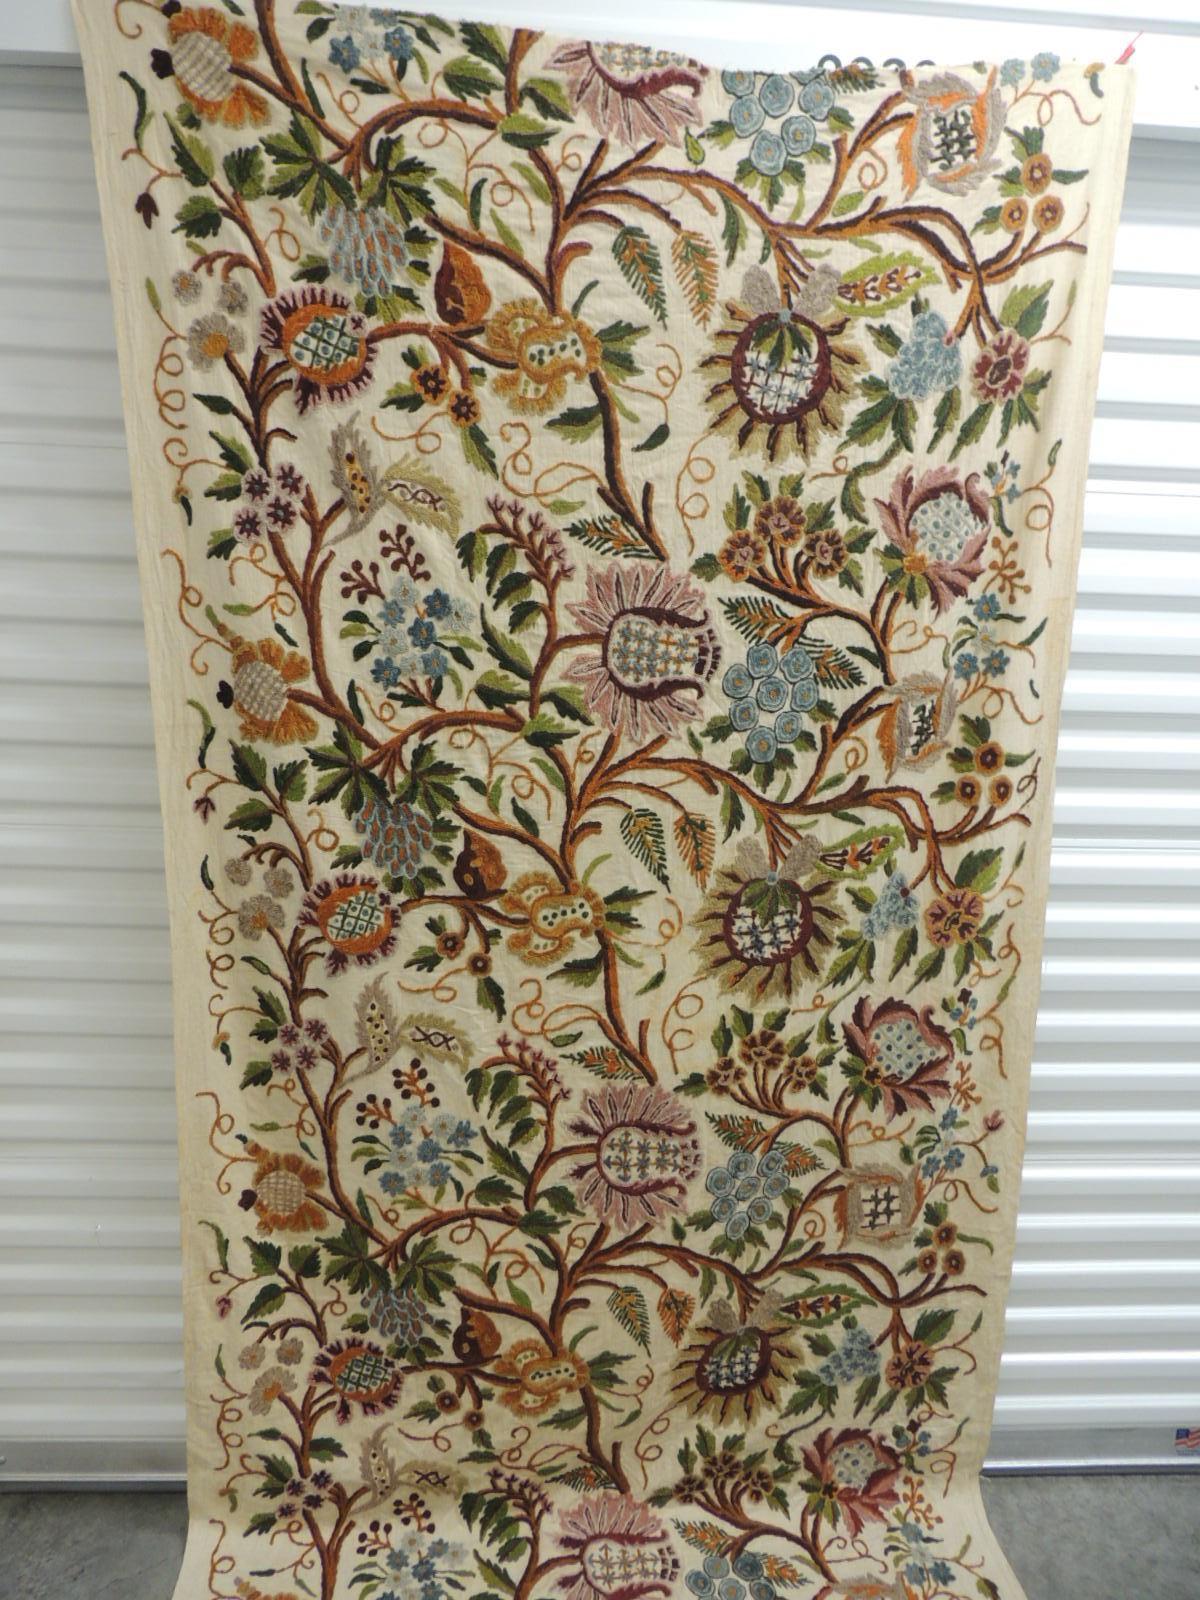 Vintage crewel work large floral embroidery linen panel. Depicting a tree of life pattern, wool embroidered on linen. Flowers scale are about 8 inches diameter. Wool threads embroidered on linen. In shades of violet, purple, blue, brown, orange,